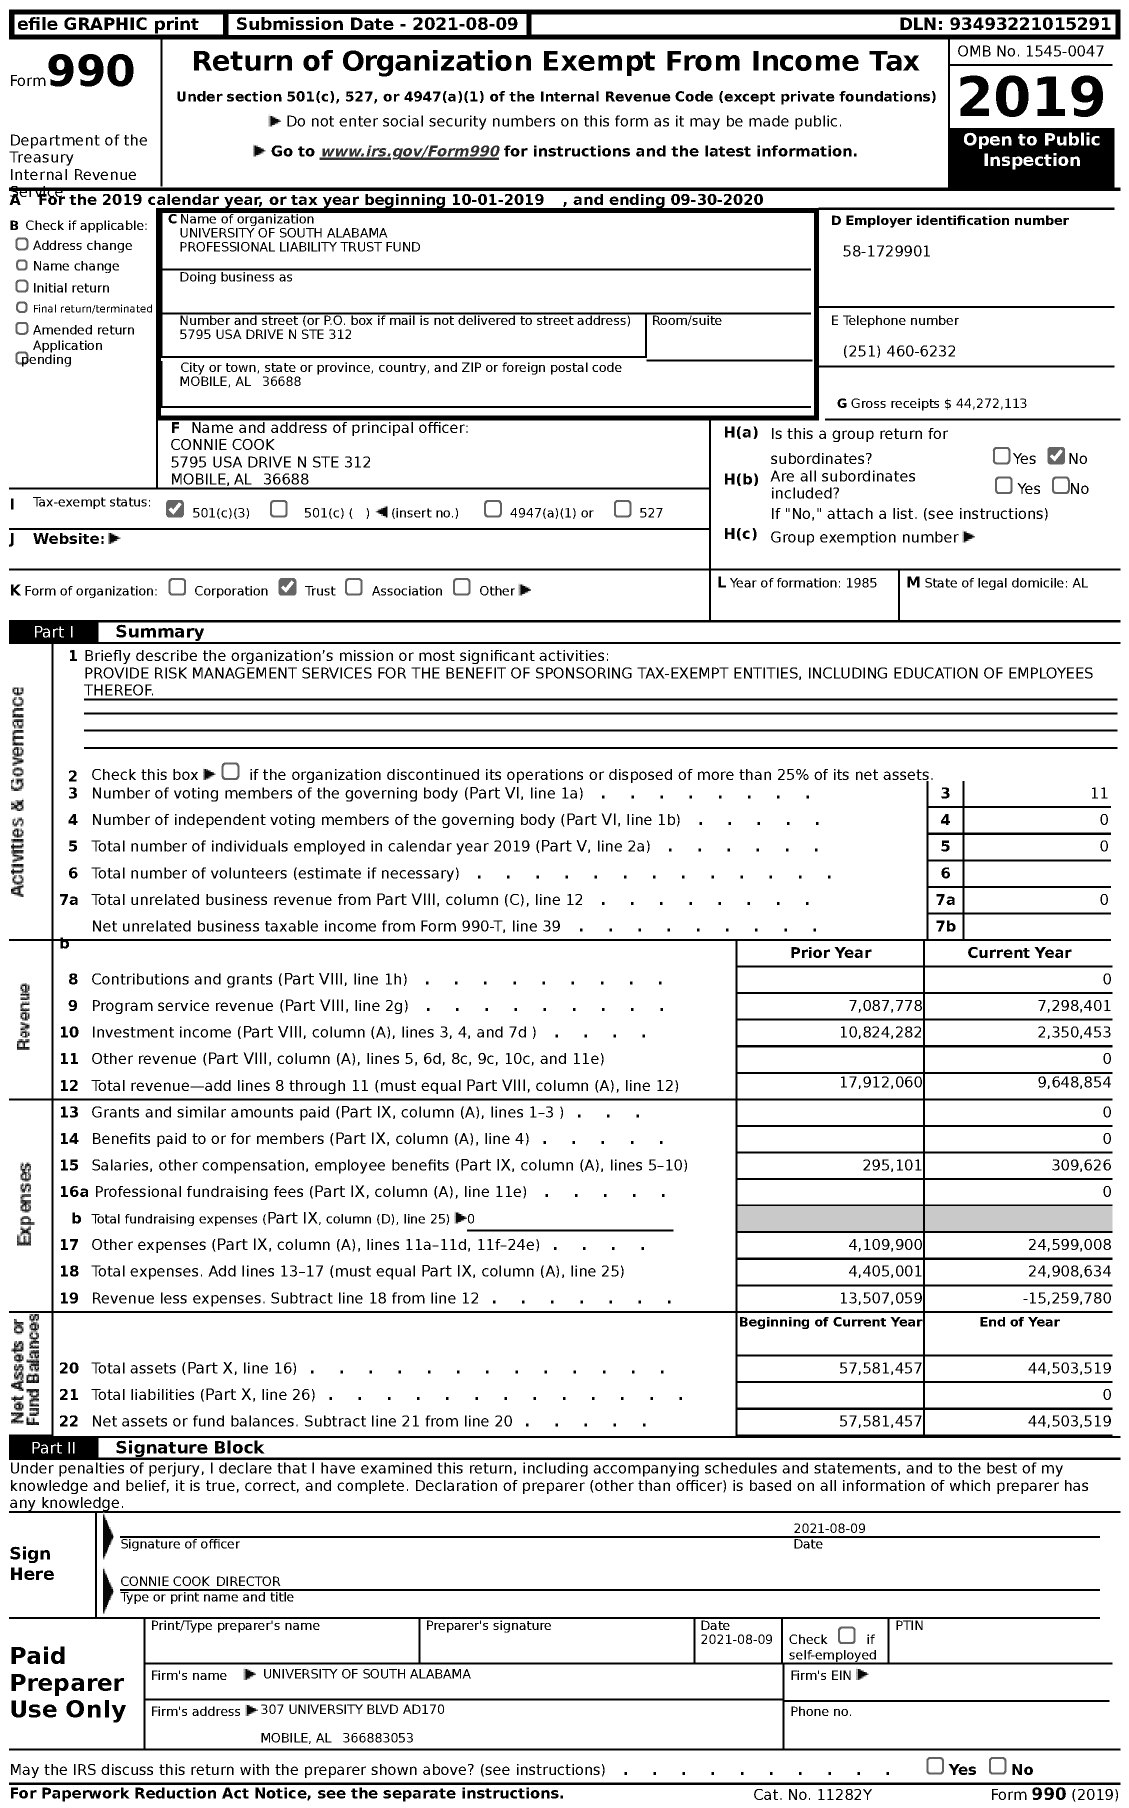 Image of first page of 2019 Form 990 for University of South Alabama Professional Liability Trust Fund